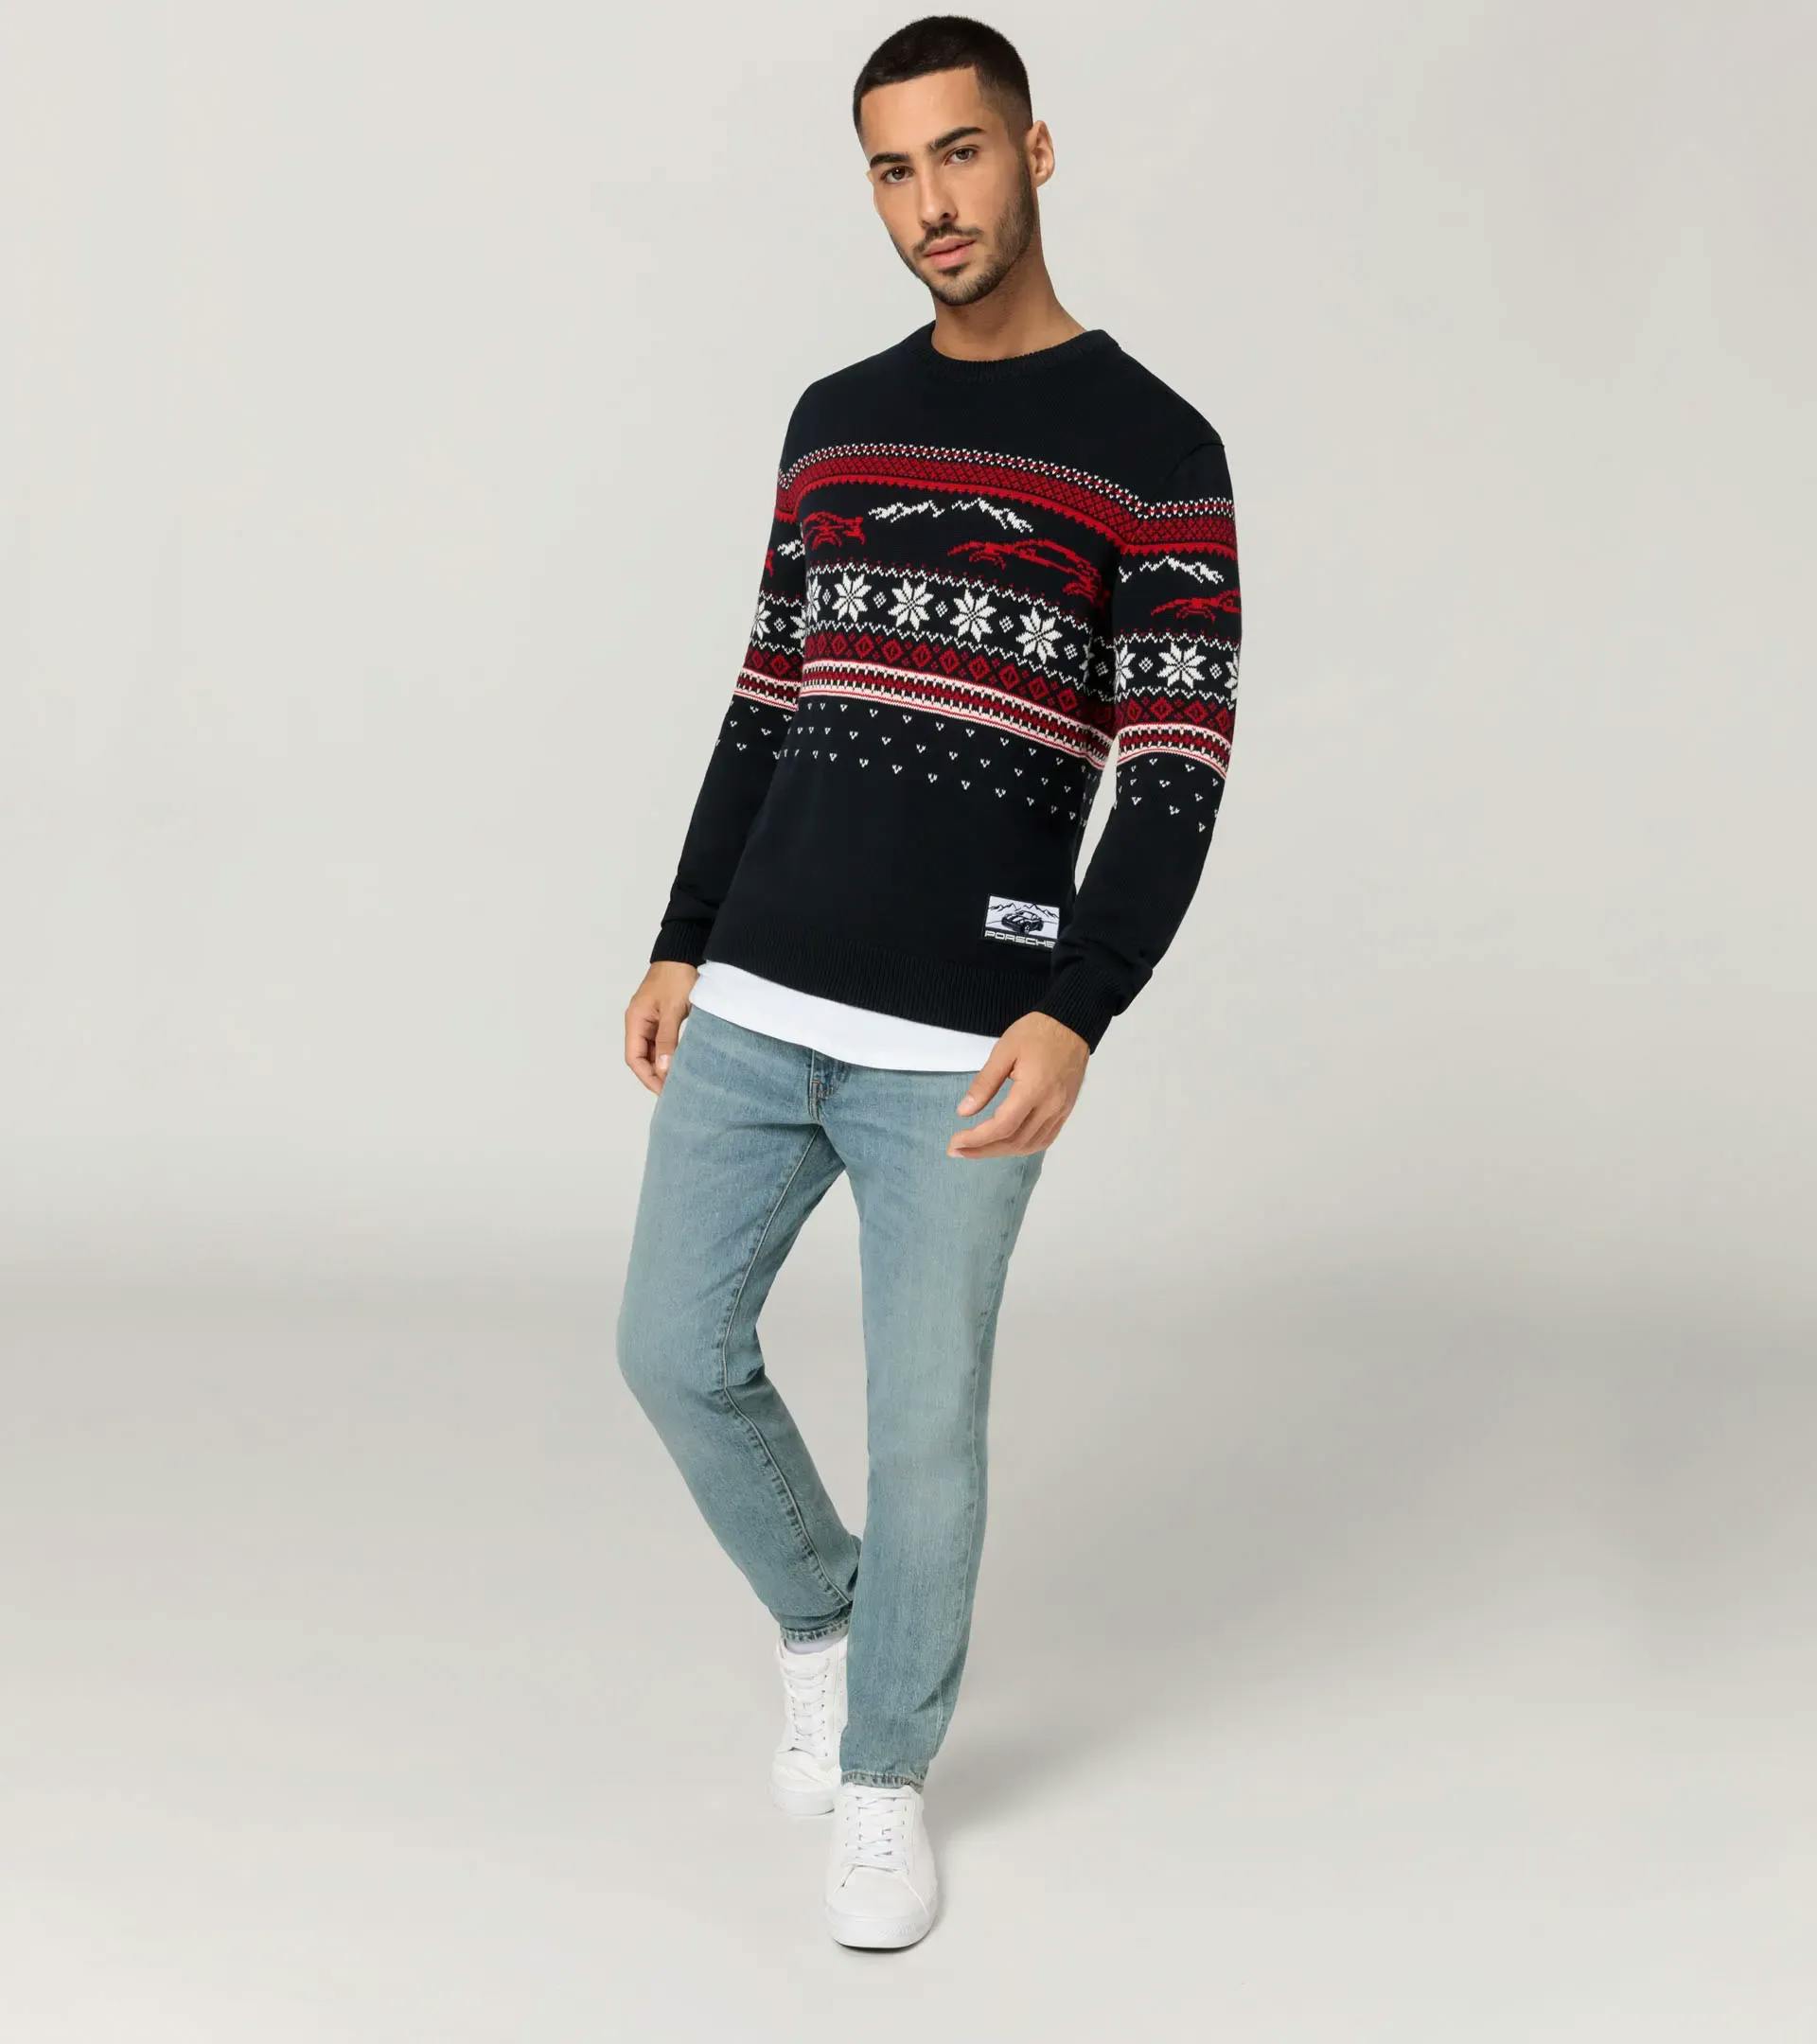 Unisex knitted pullover – Christmas 5